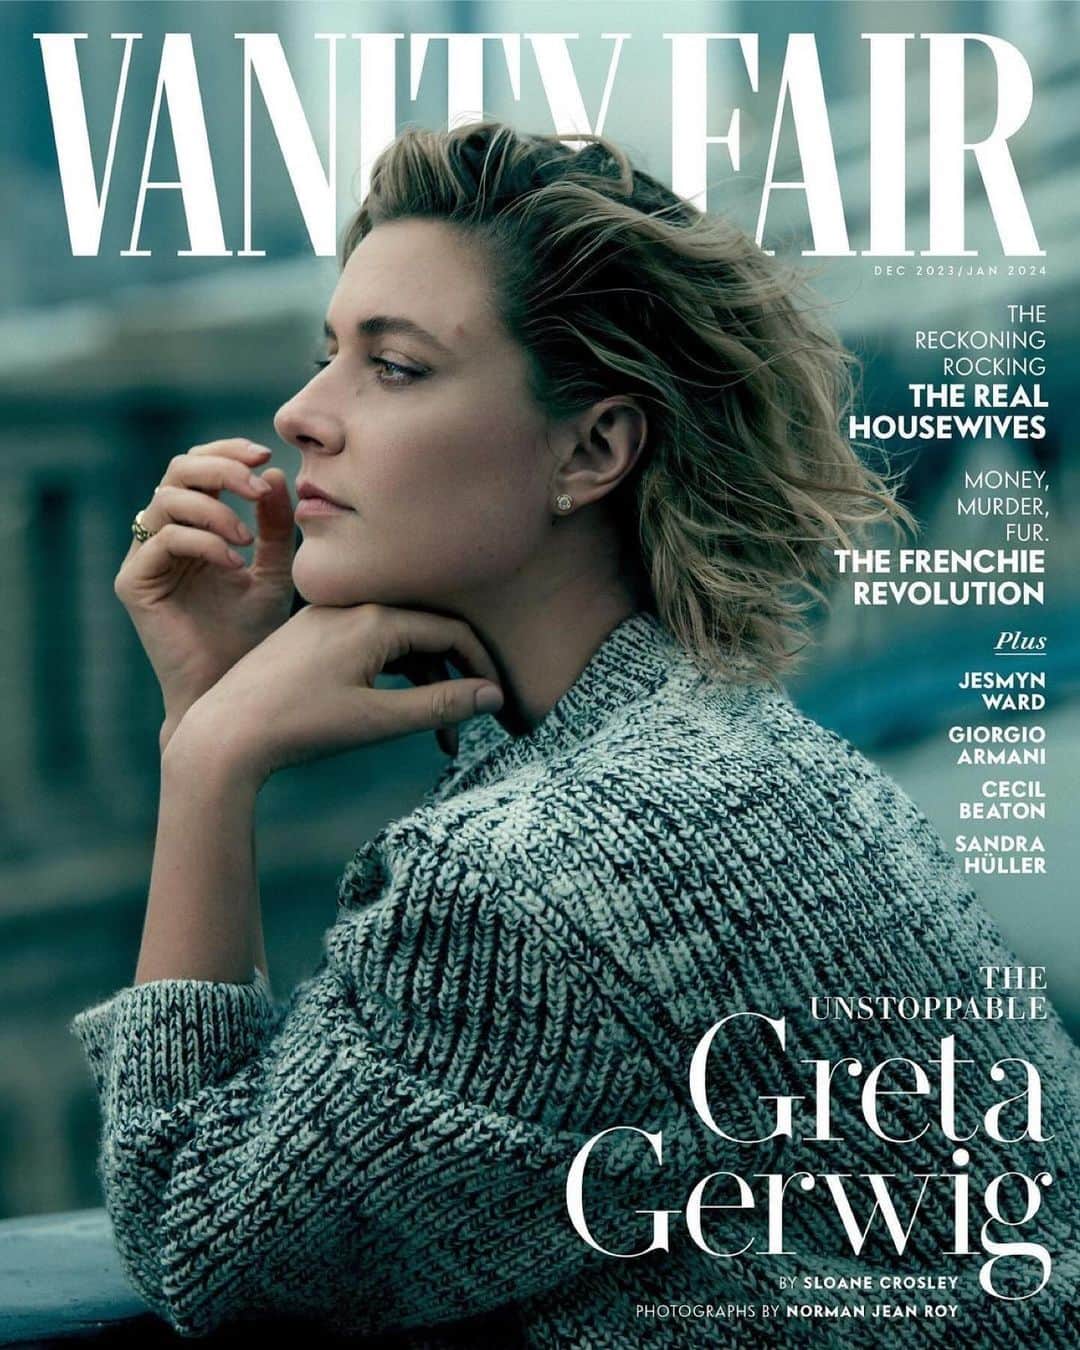 Warner Bros. Picturesのインスタグラム：「Repost from @vanityfair: With #Barbie, Greta Gerwig injected fun back into Hollywood, and $1.4 billion into the box office—and she already had three Oscar nominations under her palazzo belt. If she has her way, she’ll be doing the same thing for the next 40 years.  Gerwig has had one of the most quantifiably successful years of any artist on the planet, creating a paradigm shift that brought people back to theaters just as pop icons brought them back to stadiums, writes @sloane_crosley. Getting her to acknowledge this, however, is like asking Ken to put his shirt on. “Everything I know about the movie’s success is an anecdote,” she tells VF.   In her first extended profile since the ‘Barbie’ bonanza, the director reflects on the historic success of the film, the longevity of her career, and working with the man who is also her life partner.   Photographer @normanjeanroy Wardrobe Stylist @NatashaRoyt Tailor @mariadelgreco Hair Stylist @bobrecine Makeup Artist @romyglow Manicurist @redhotnails Set Designer  @vikirutsch Producer @Boomproductions」